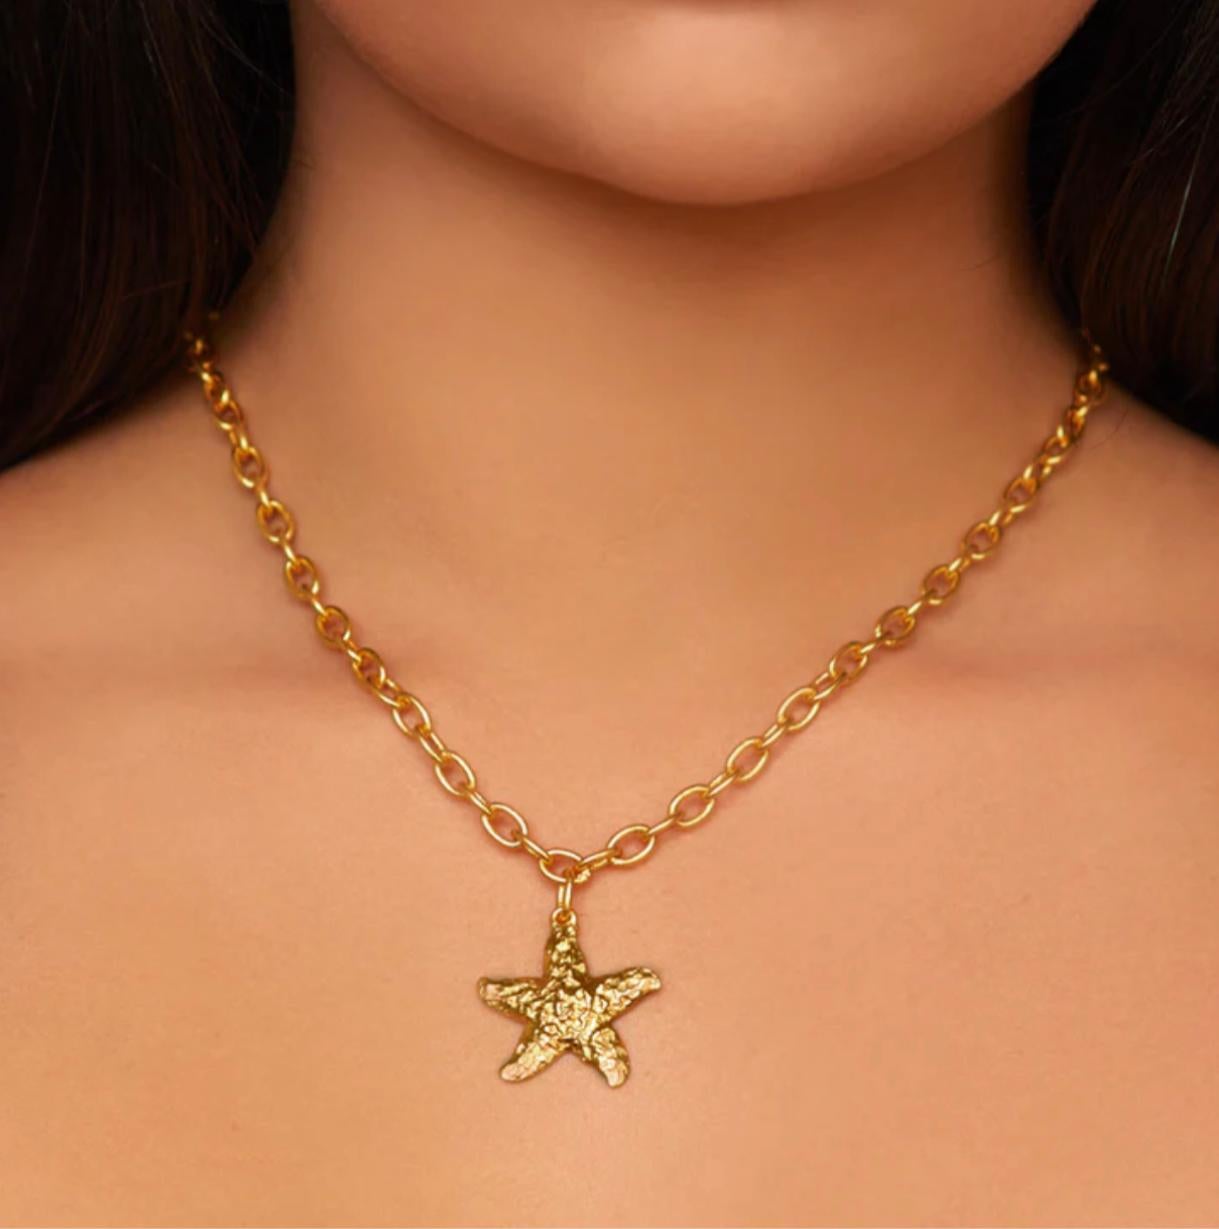 The Alana necklace features a hand-beaten starfish and is the perfect necklace for weekend wear. Enjoy this one-of-a-kind handmade necklace on your next European getaway or tropical vacation.

Designed in Sydney, Australia and plated in luxurious